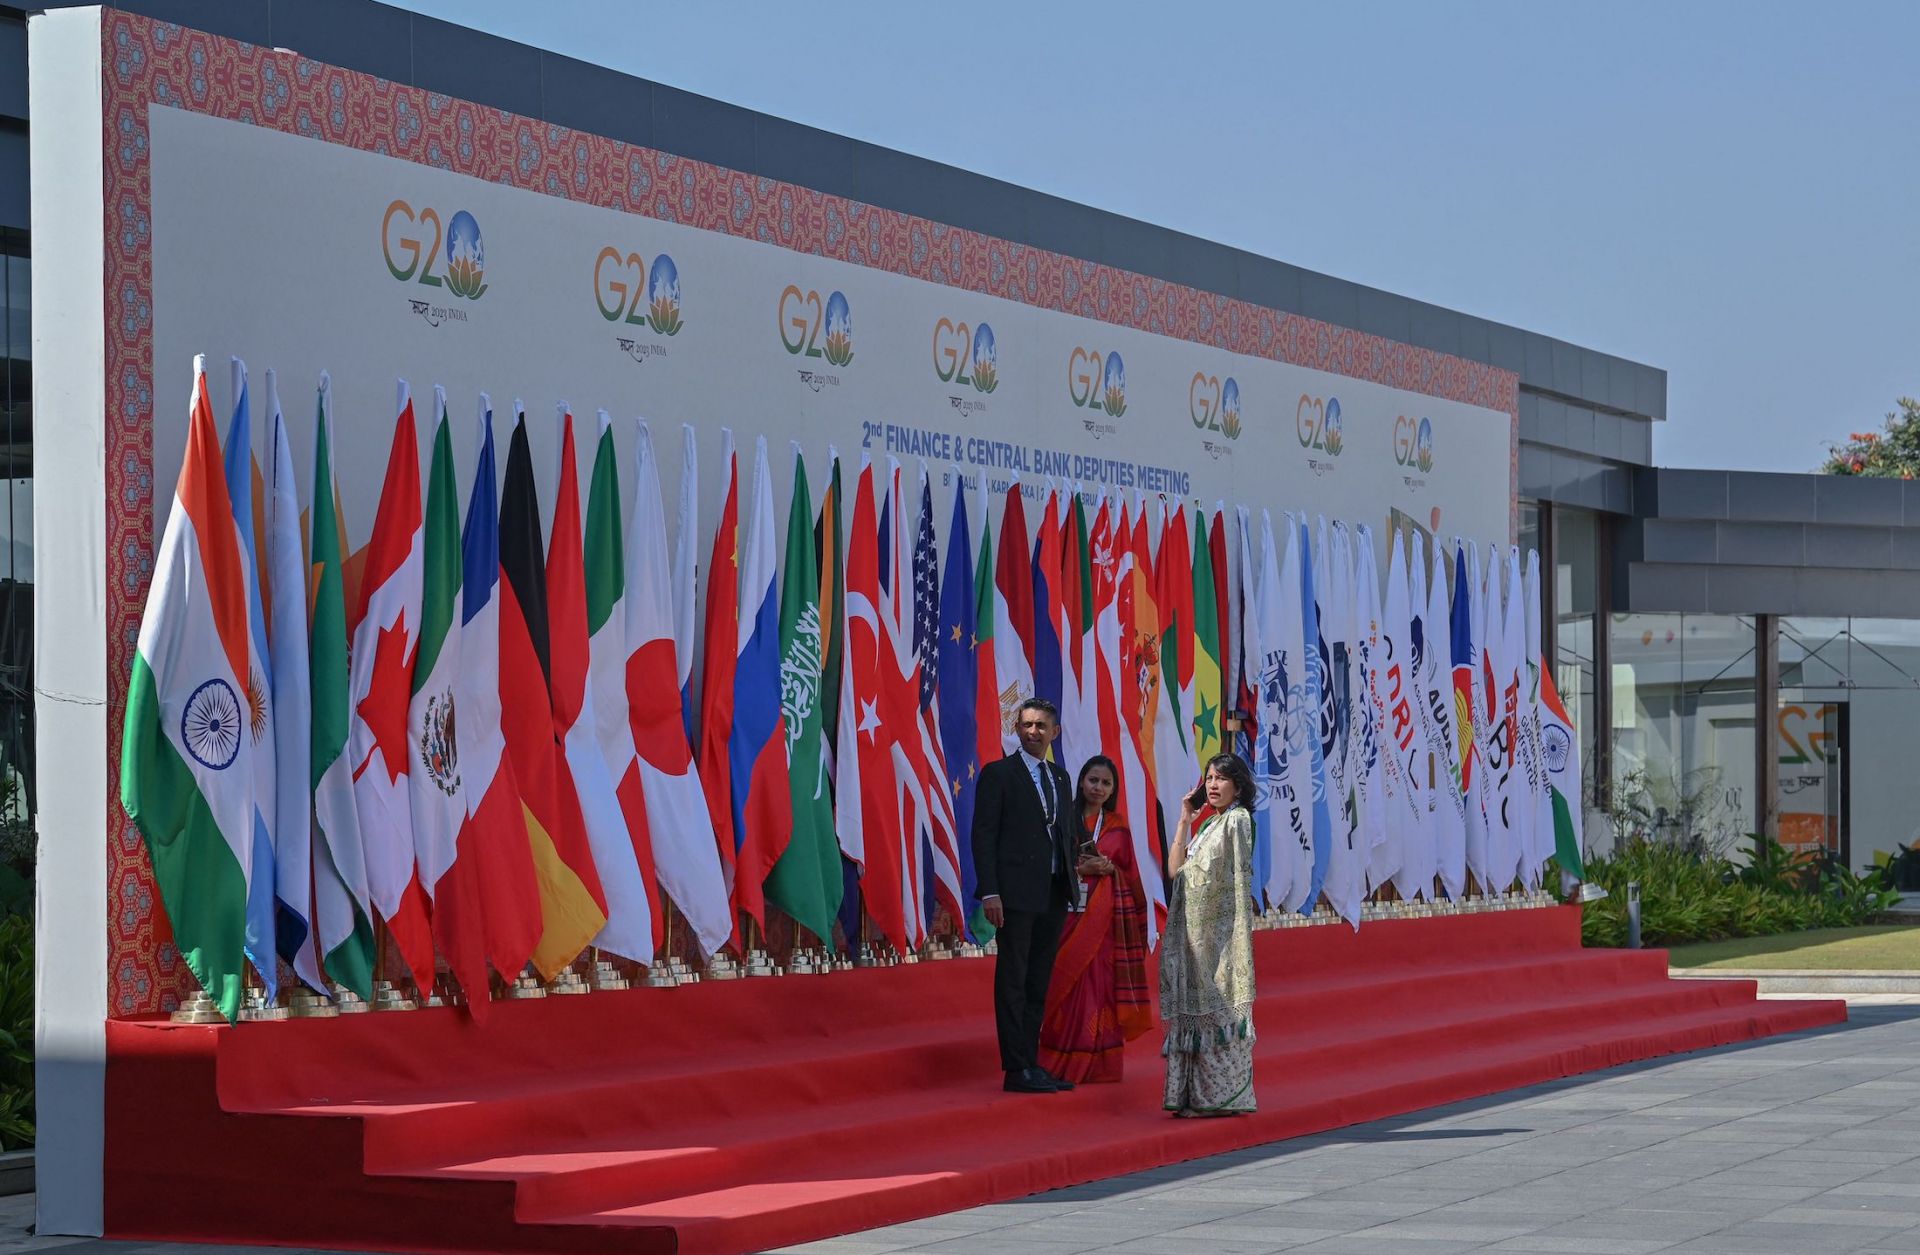 Officials stand near flags of participating countries and organizations at the venue where the second meeting of the G-20 Finance and Central Bank Deputies under India's G-20 presidency has begun Feb. 22, 2023, in Bengaluru, India.